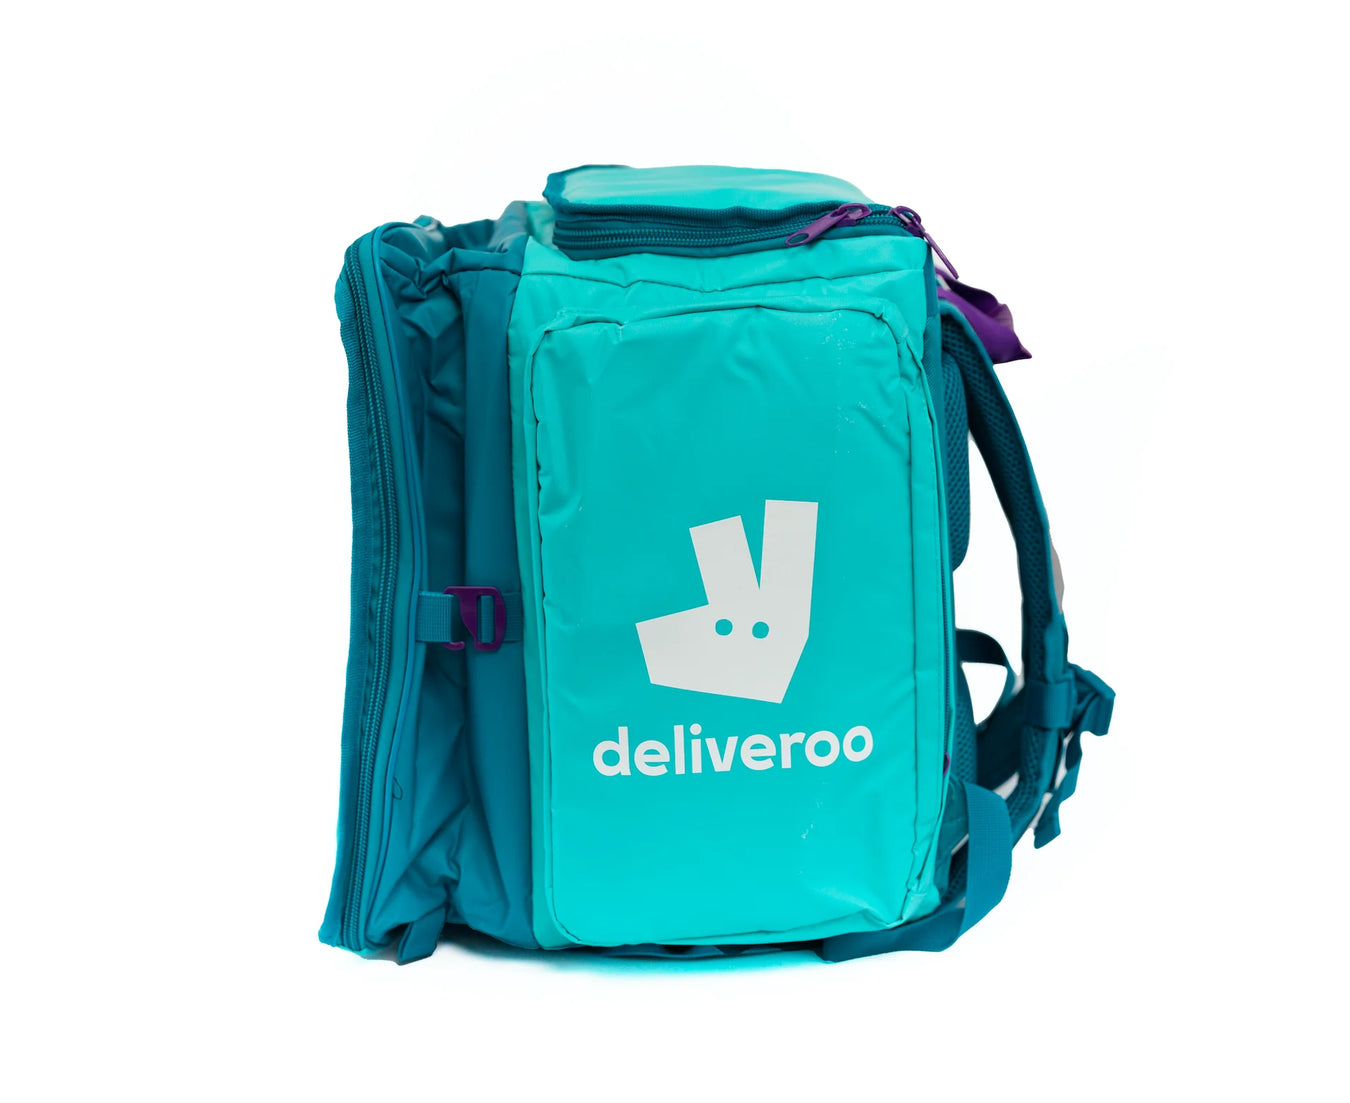 Rider's Kit - Deliveroo